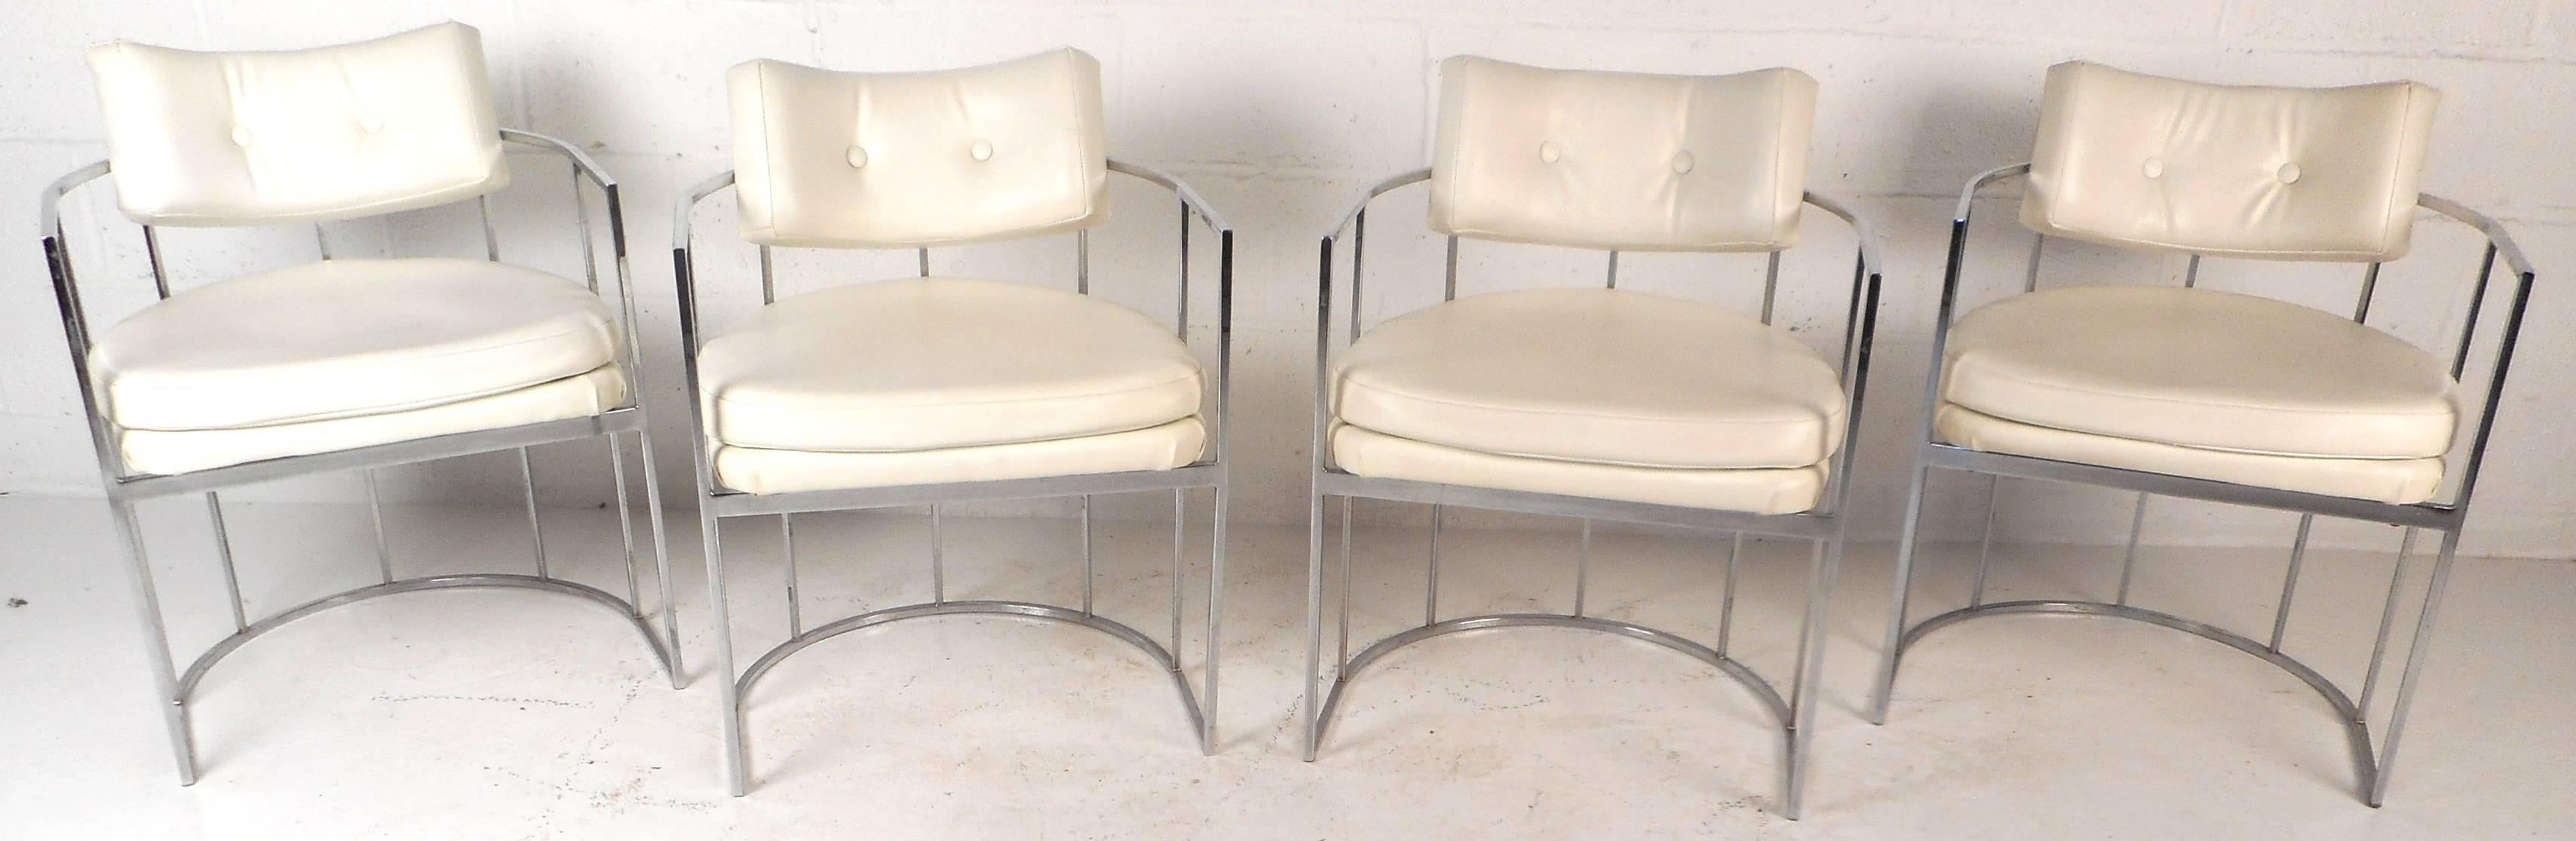 This elegant set of four vintage modern armchairs feature unique ellipse chrome frames that function as arm rests and a sturdy base. The sleek design is covered in white vinyl with thick padded seating and a tufted floating backrest. This stunning